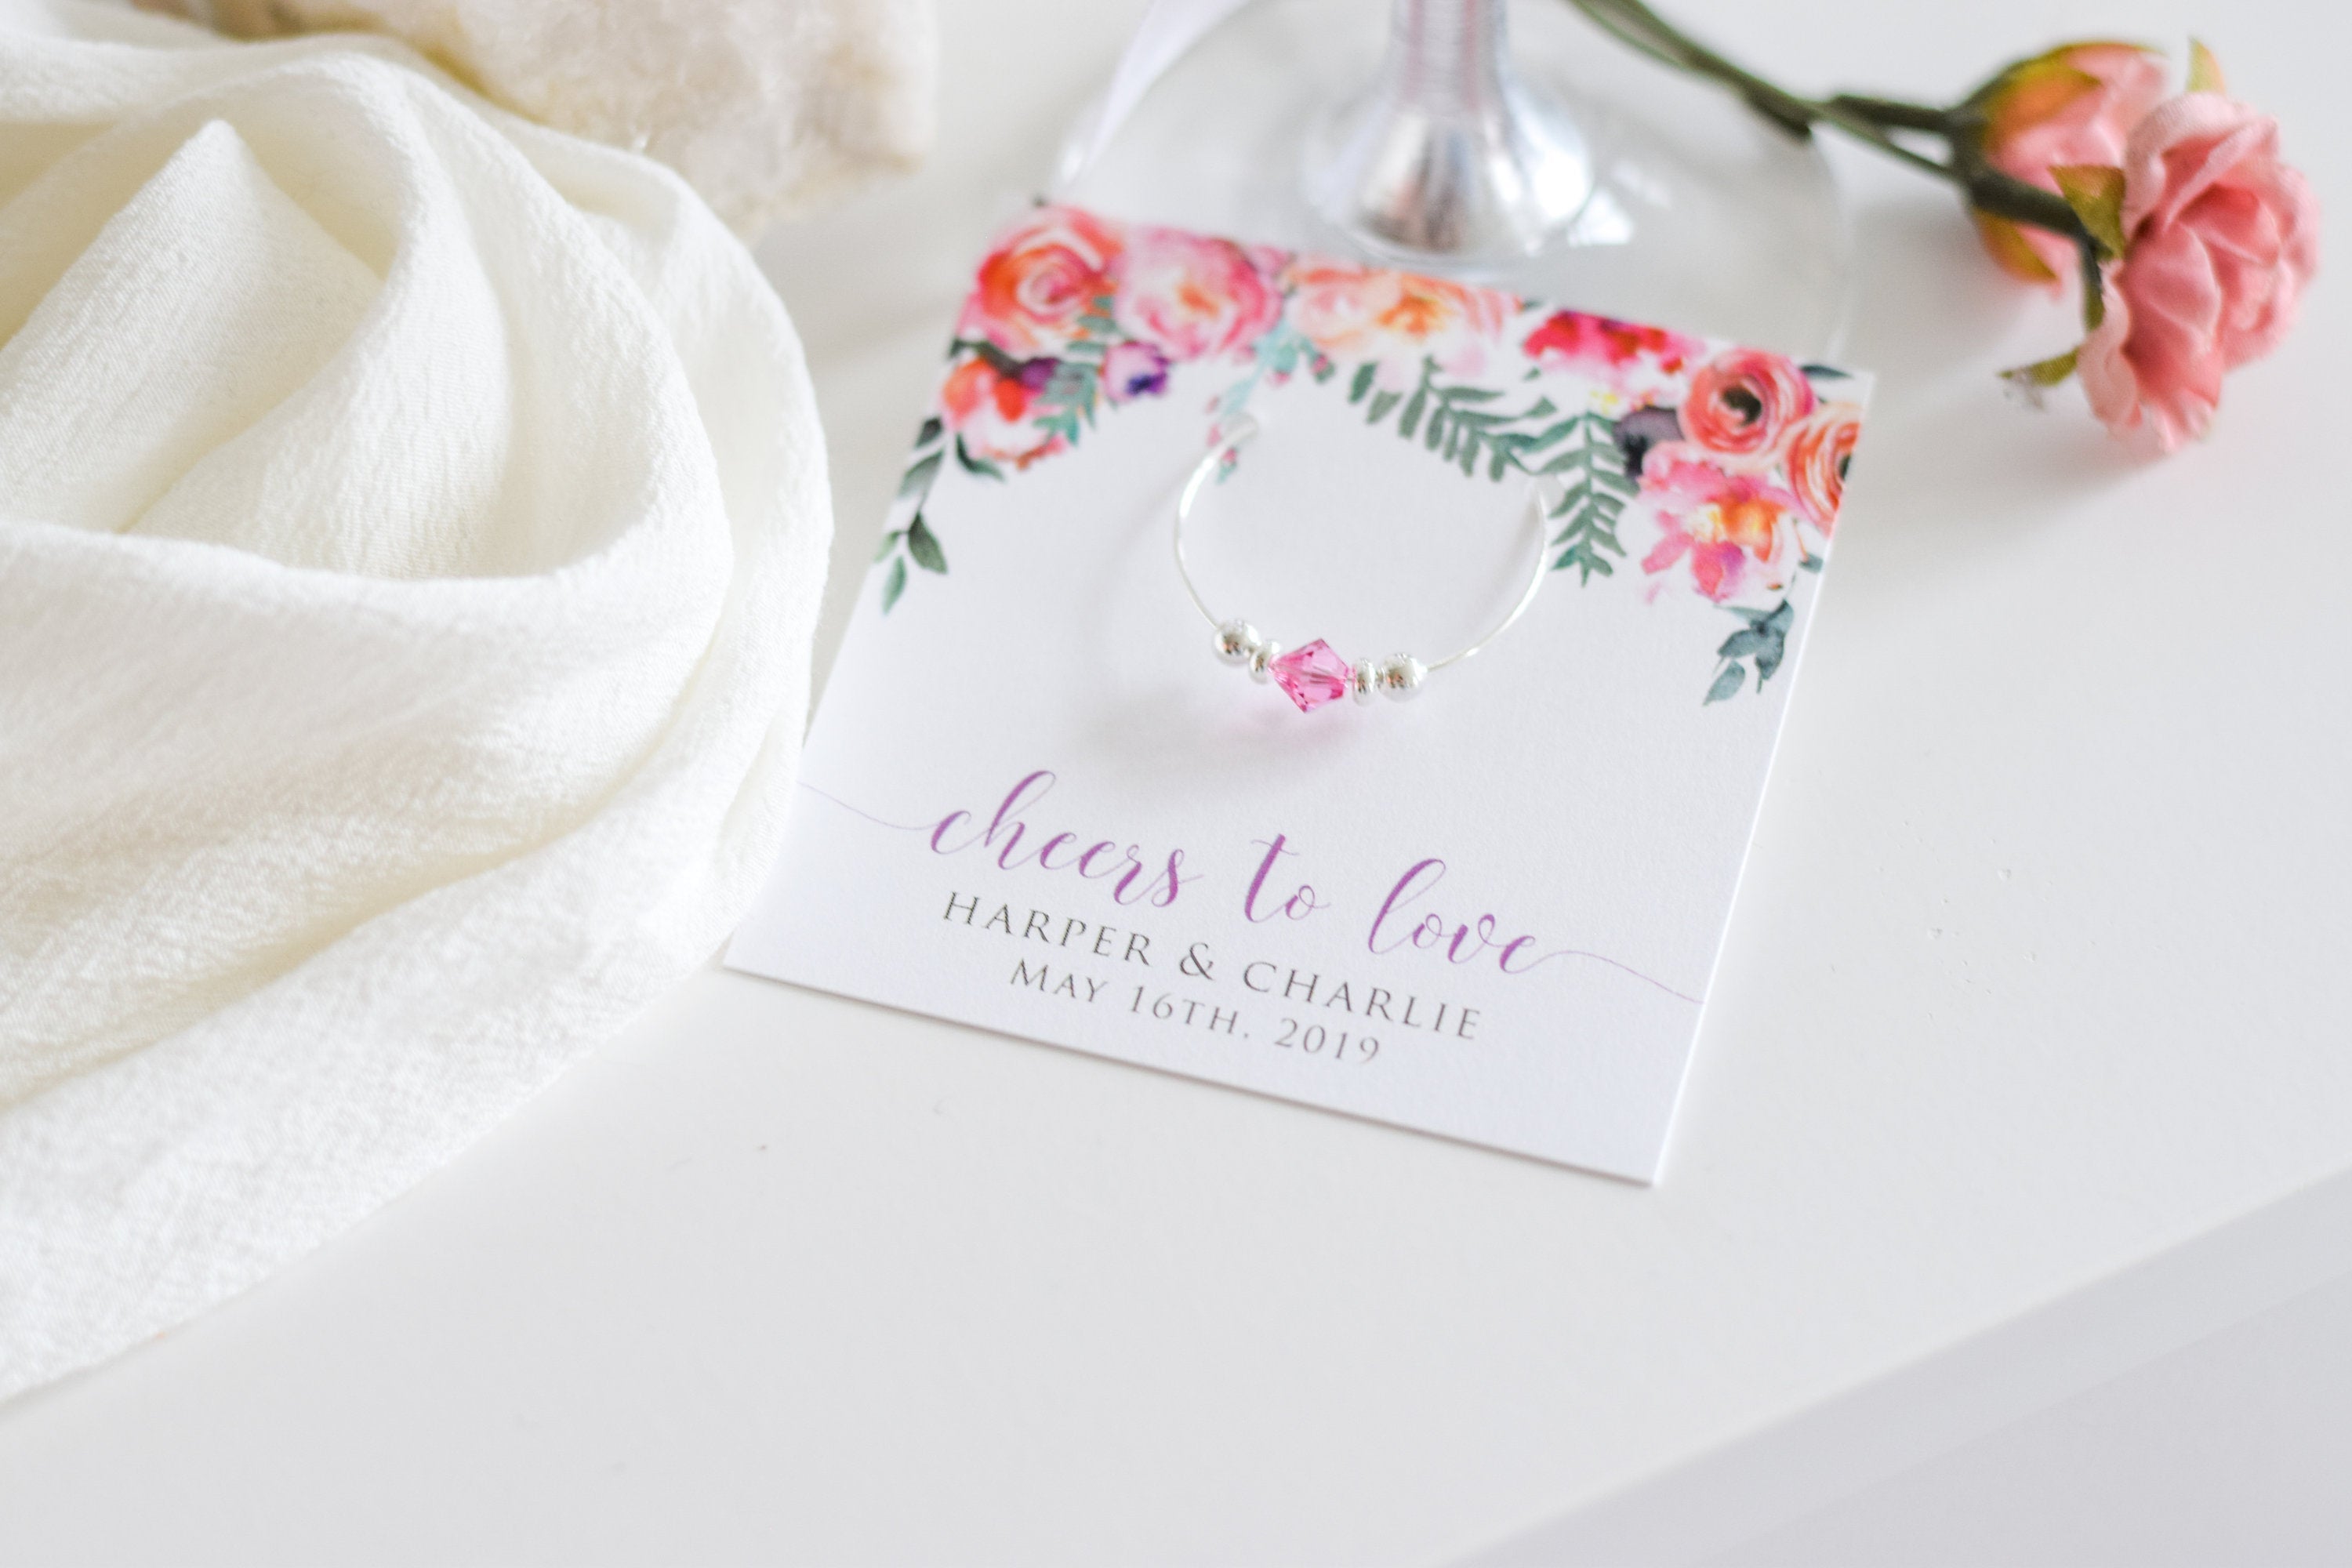 Garden Wedding Favors, Pink Floral Wedding Favors, Cheers to Love Wedding Favors Personalized, Outdoor Wedding Swarovski Crystal Wine Charms - @PlumPolkaDot 